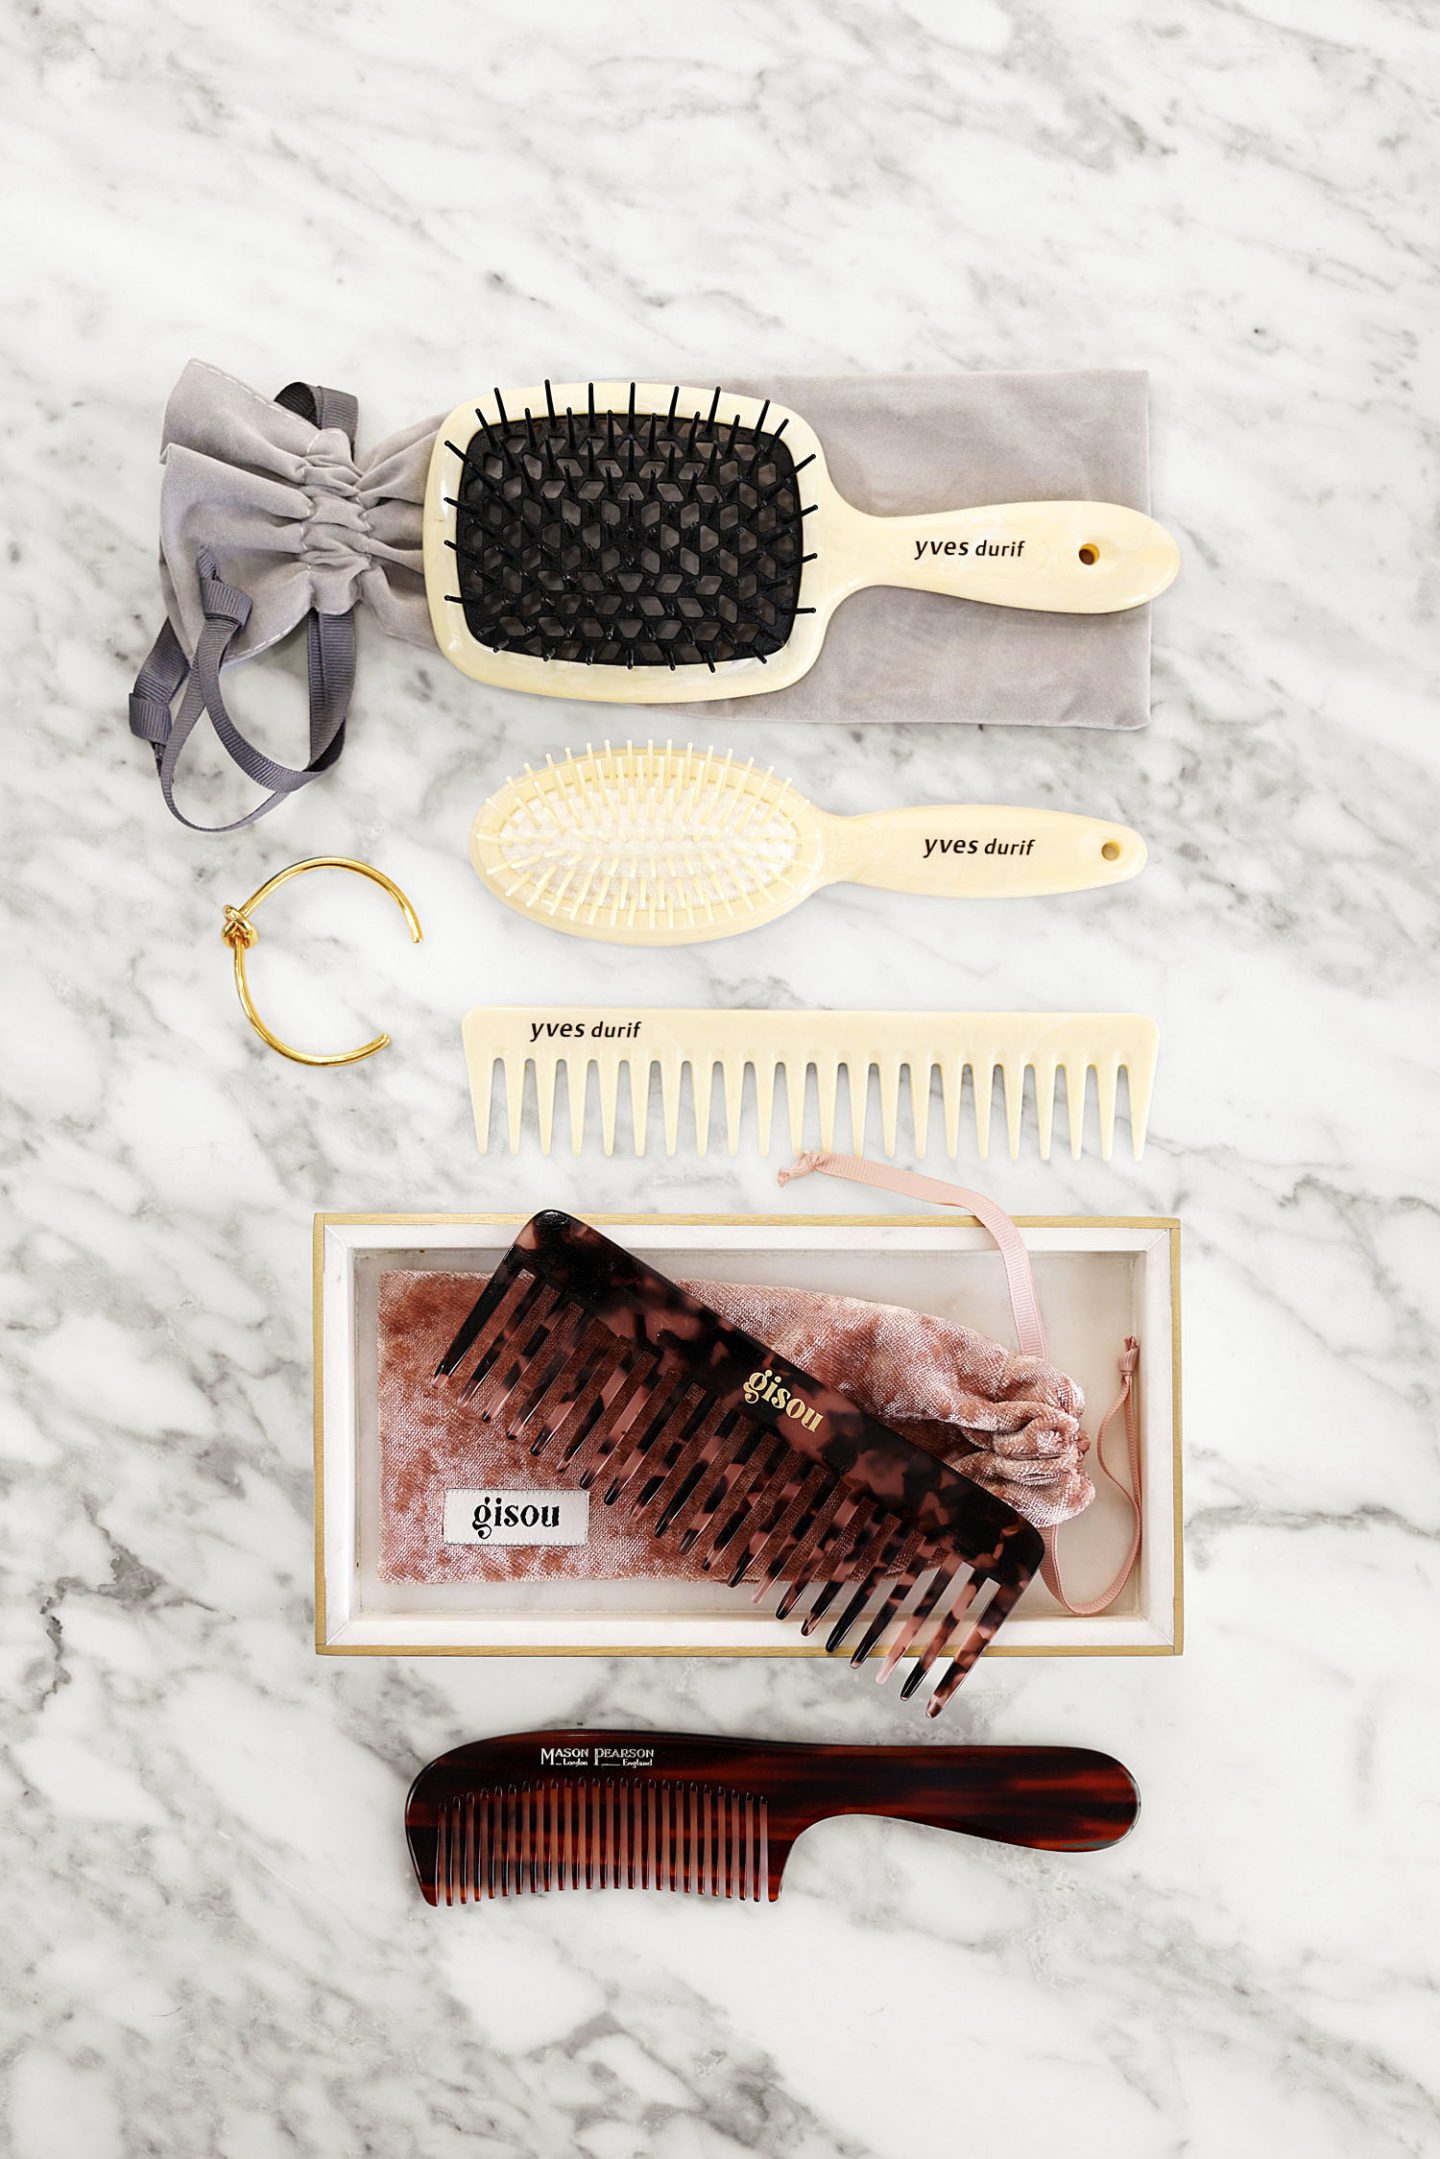 Best Brushes and Combs, Yves Durif, Gisou and Mason Pearson